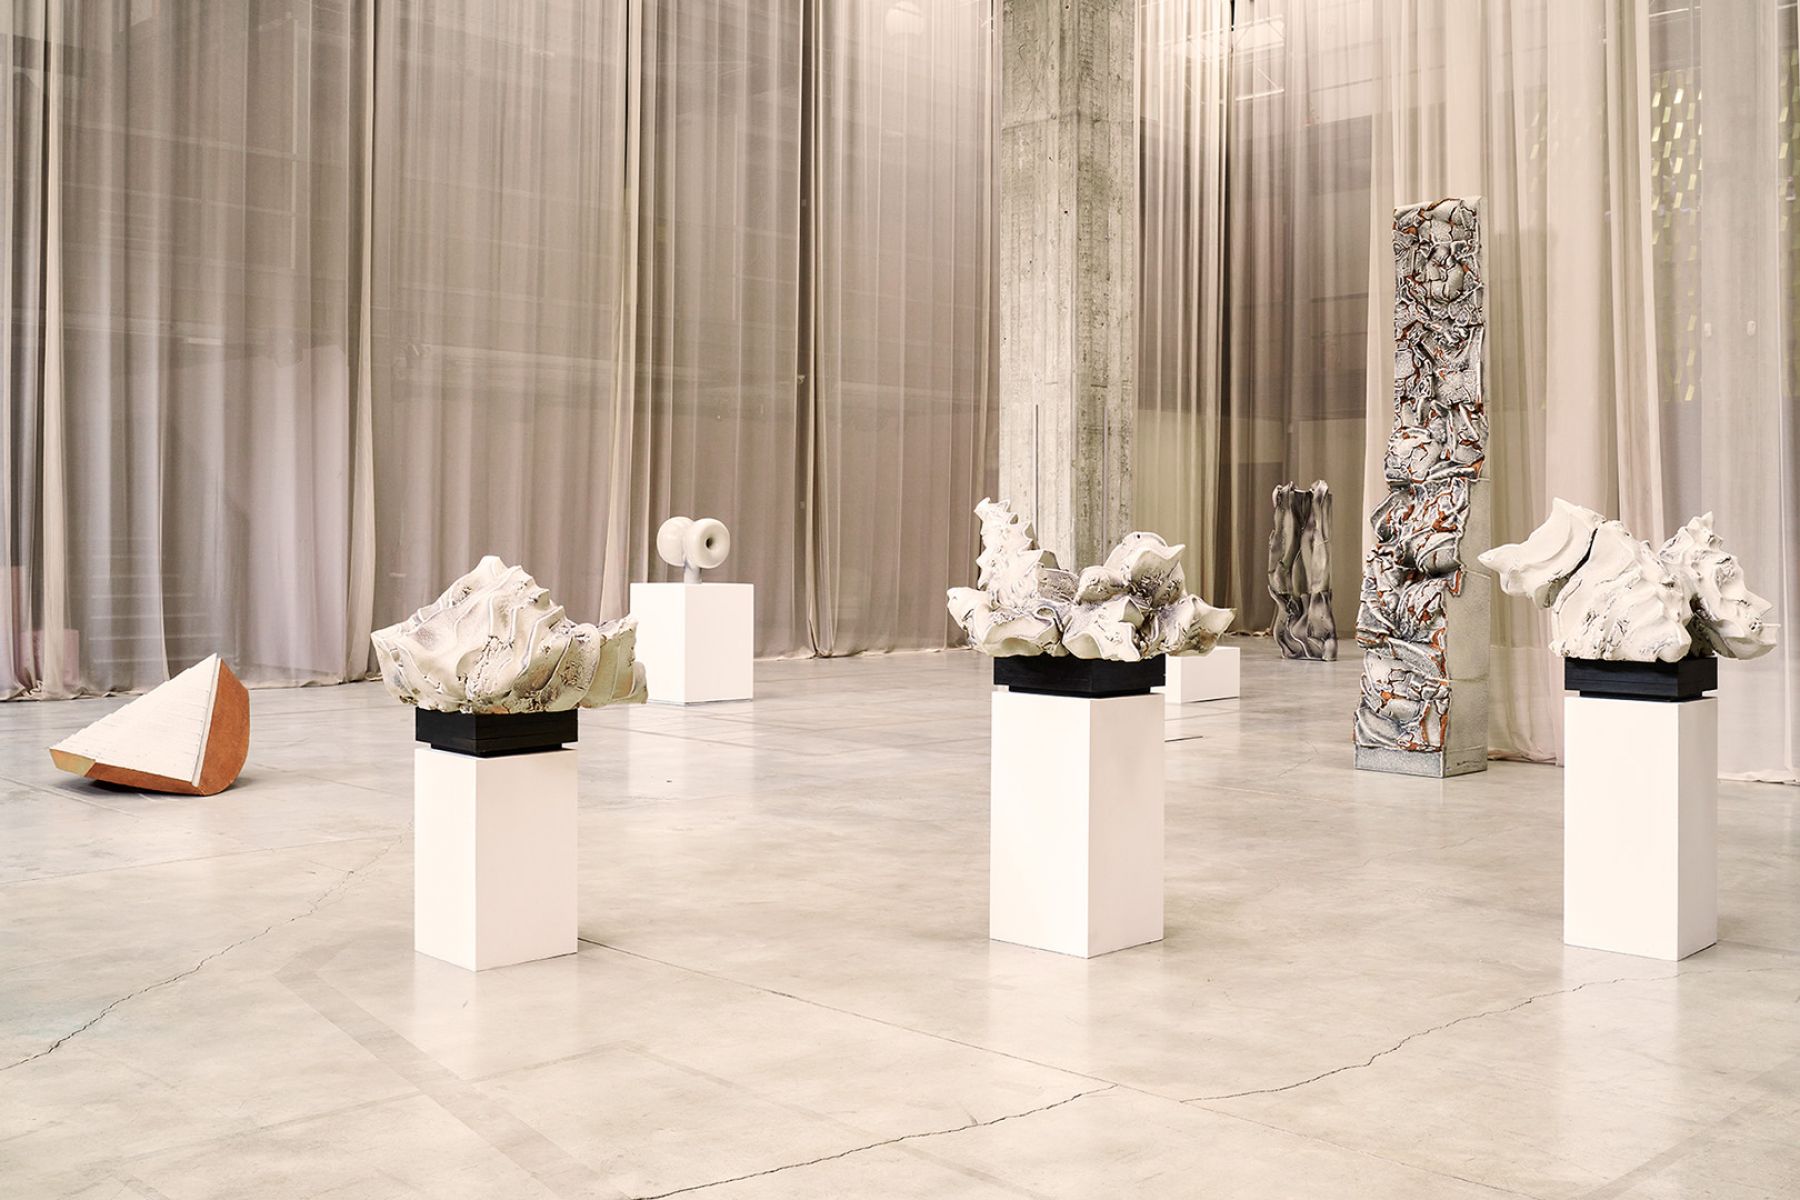 CARLO ZAULI: AN EXHIBITION DEDICATED TO THE GIFTED CERAMIC ARTIST-pic-6